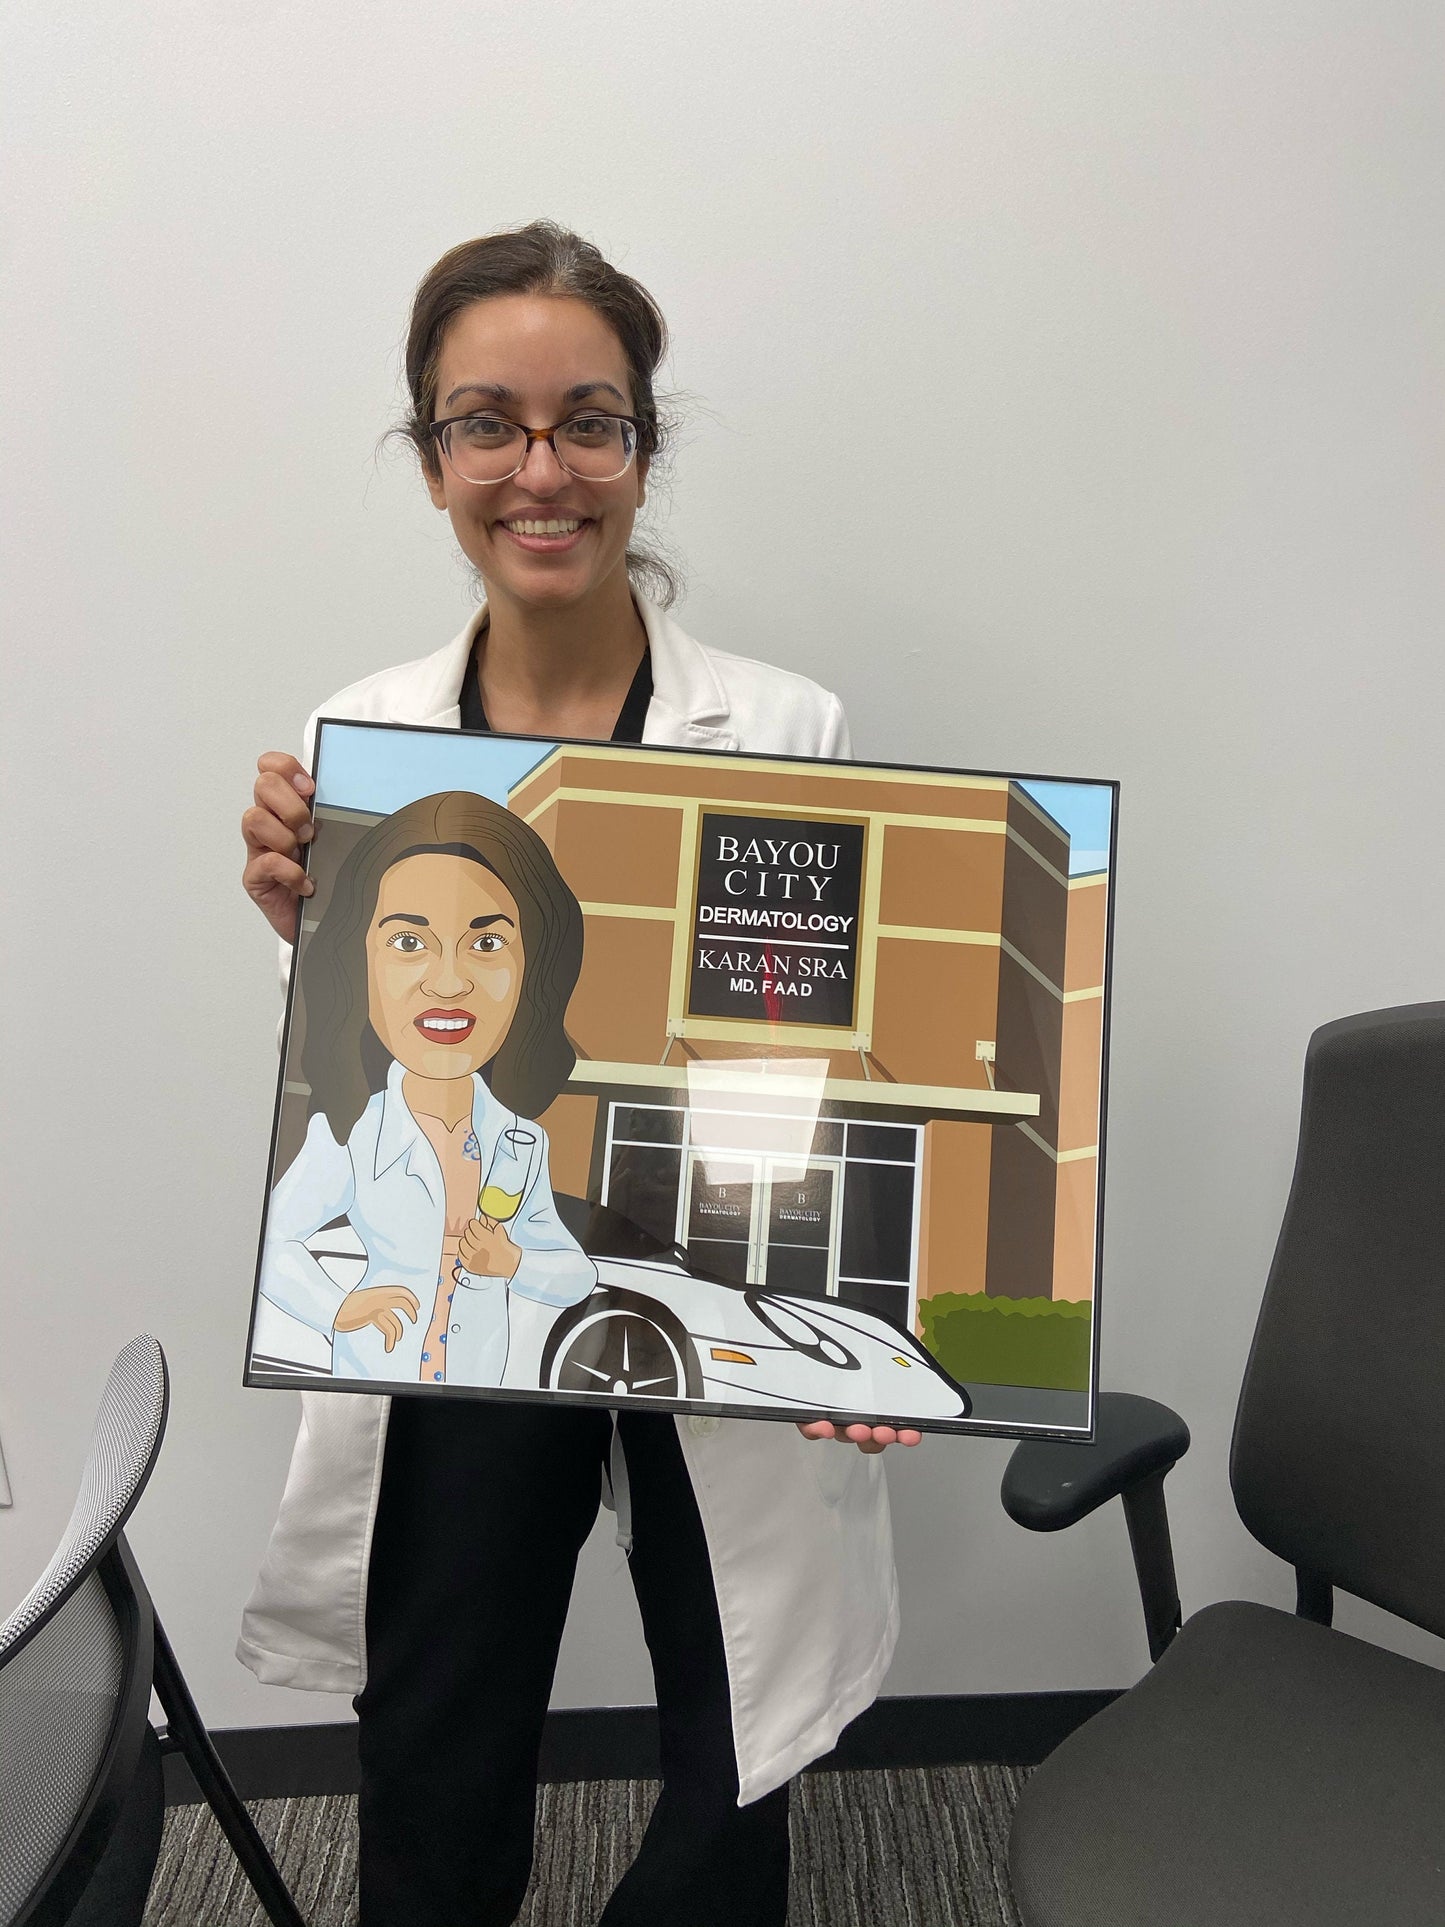 Microbiologist Gift - Custom Caricature Portrait From Your Photo